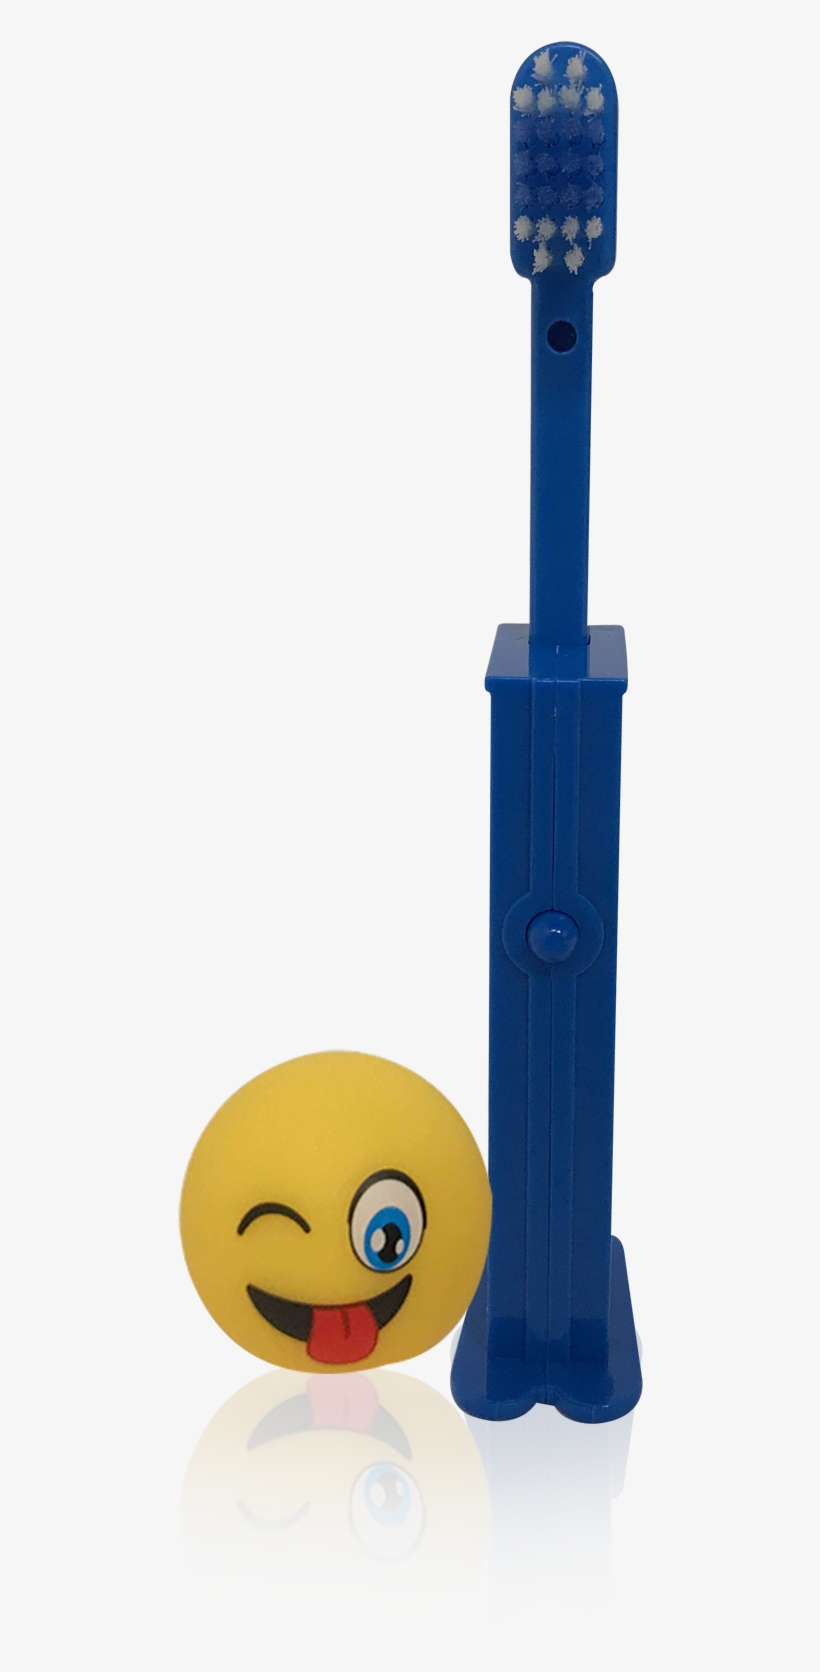 Load Image Into Gallery Viewer, Brush Buddies Pez Poppin& - Smiley, transparent png #7662783